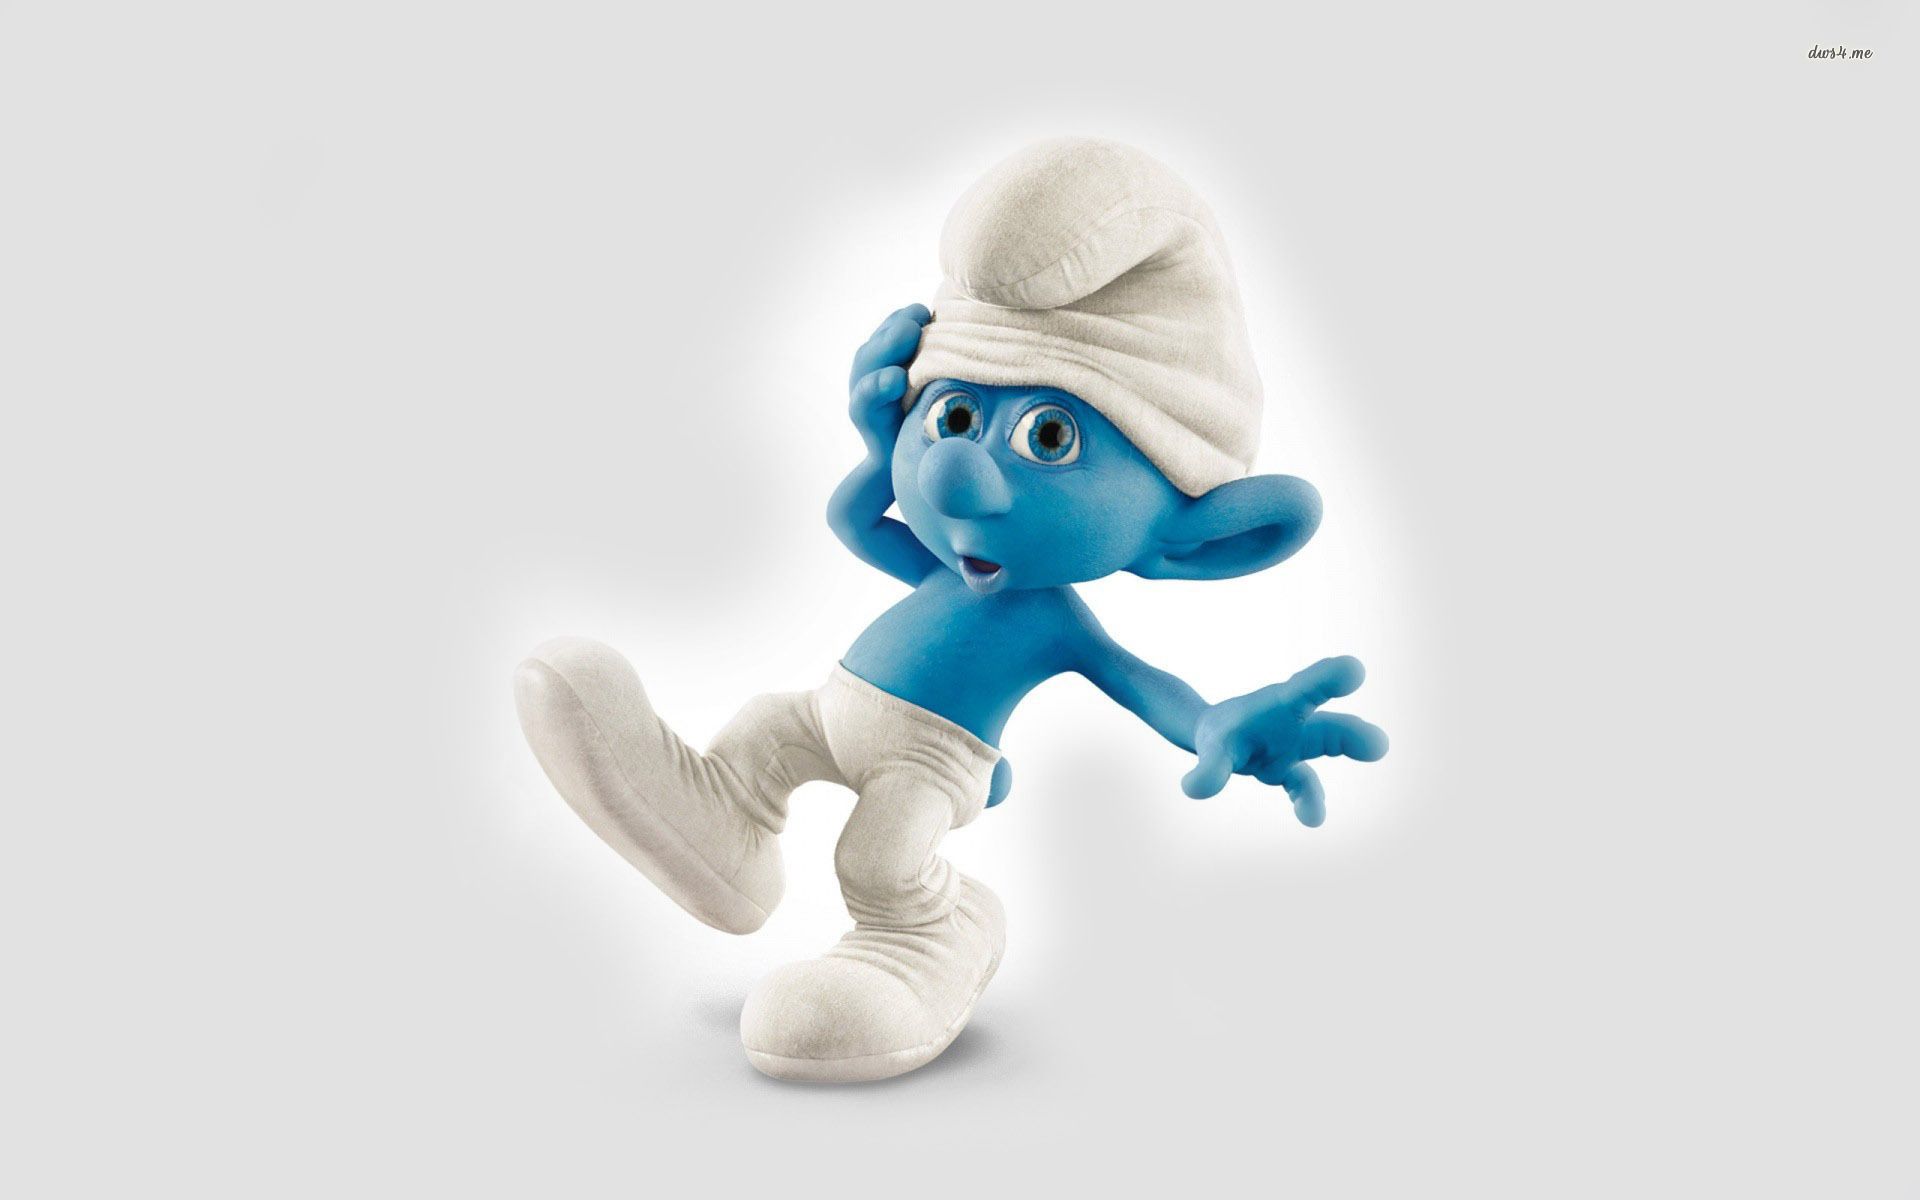 Clumsy - The Smurfs wallpaper - Cartoon wallpapers - #12190